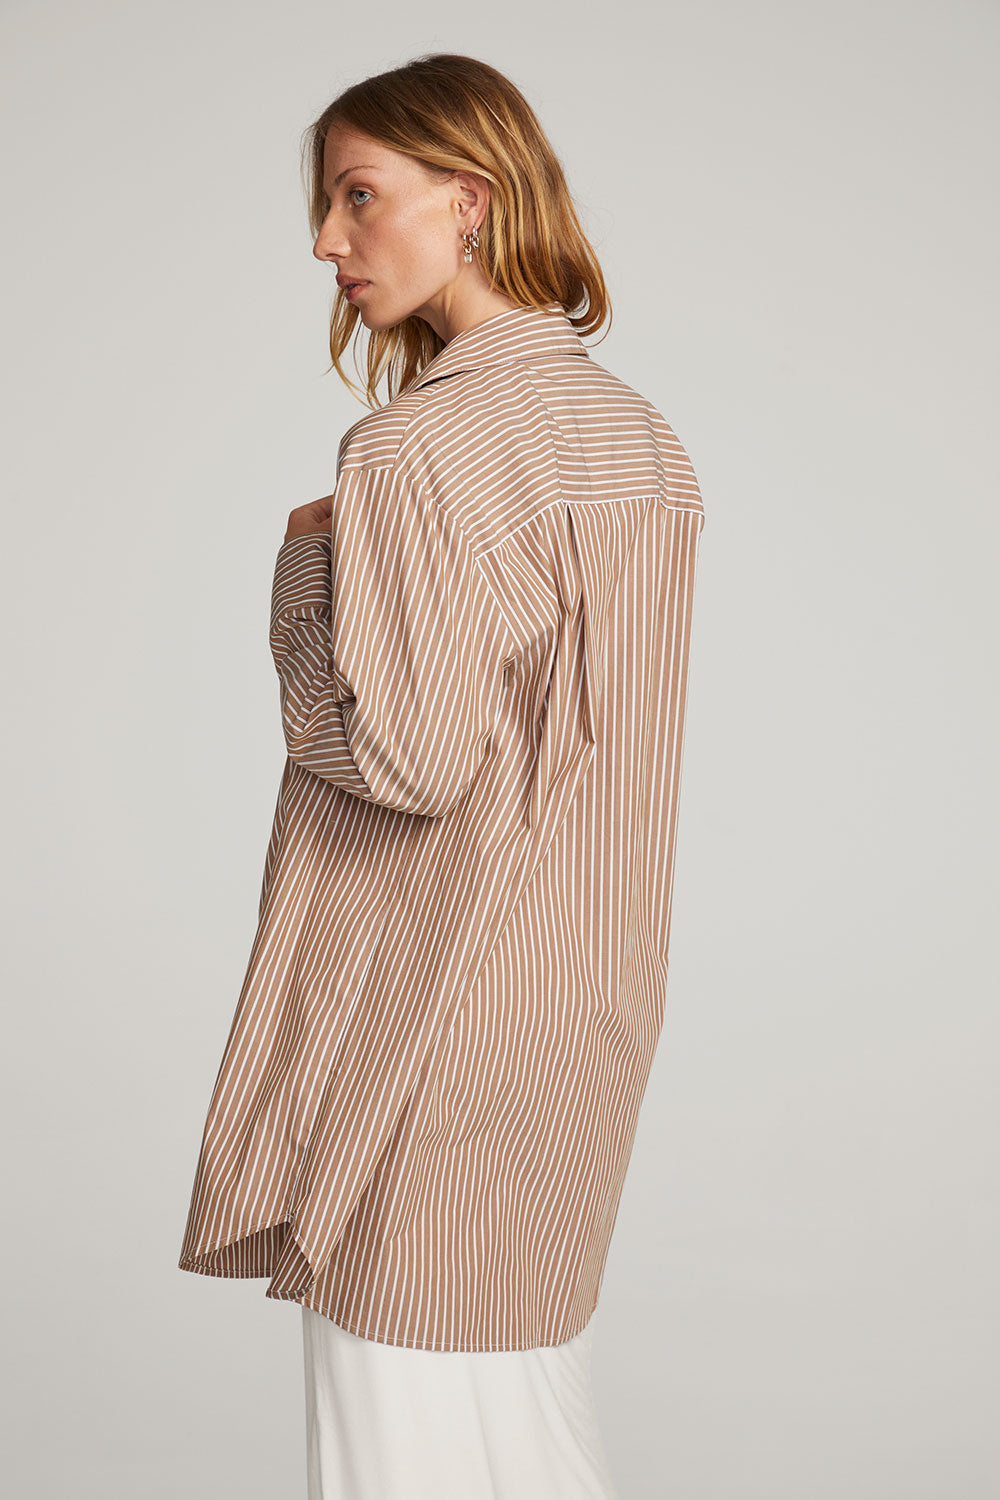 Kerstin Whiskey Stripe Button Down WOMENS chaserbrand